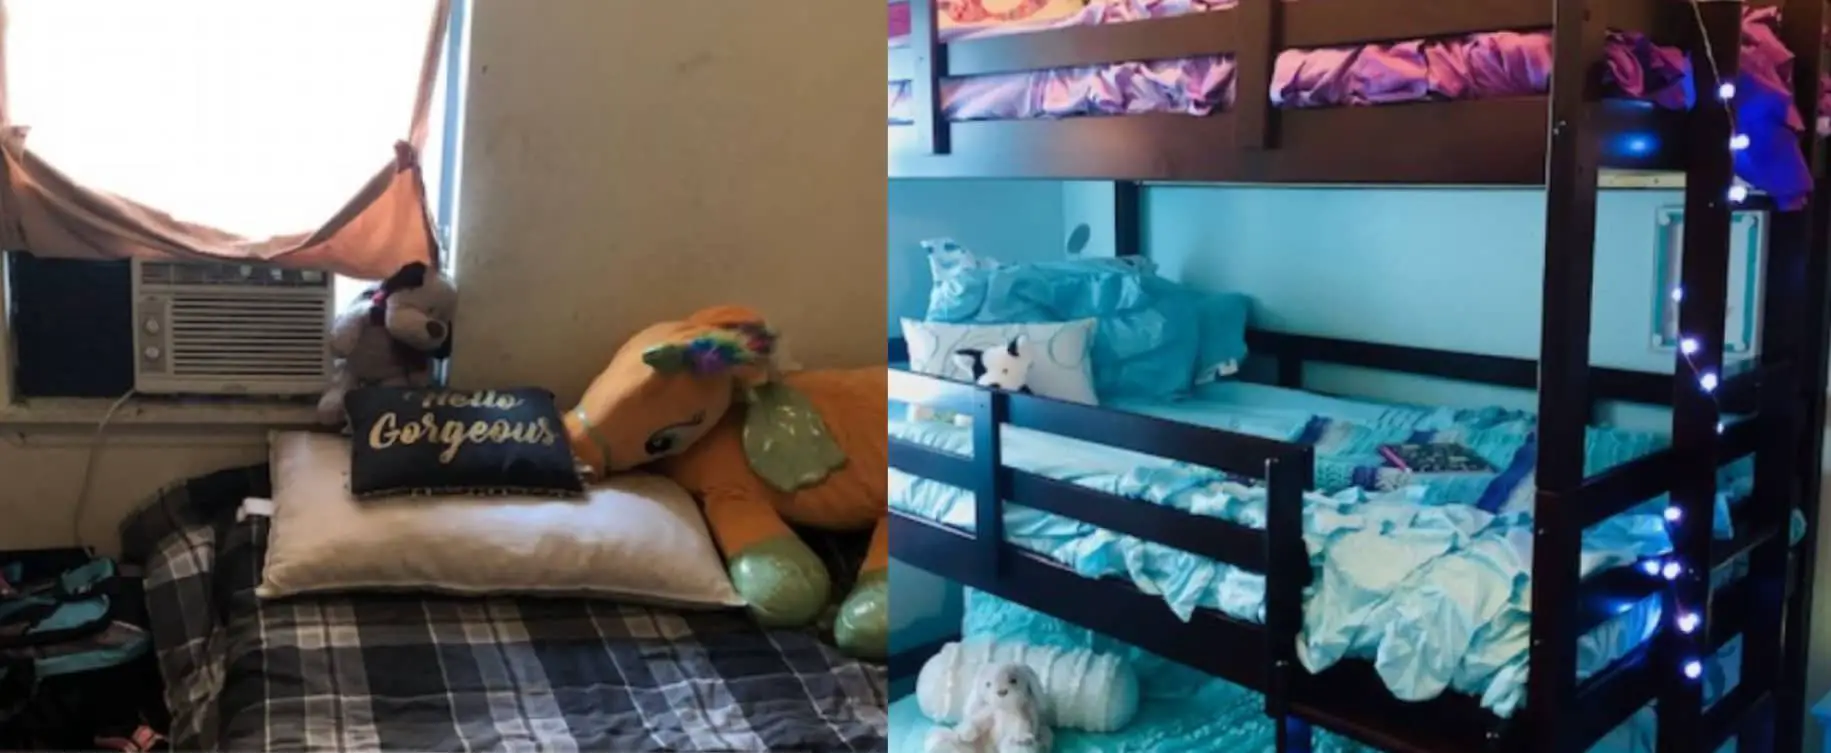 before and after bedroom transformation